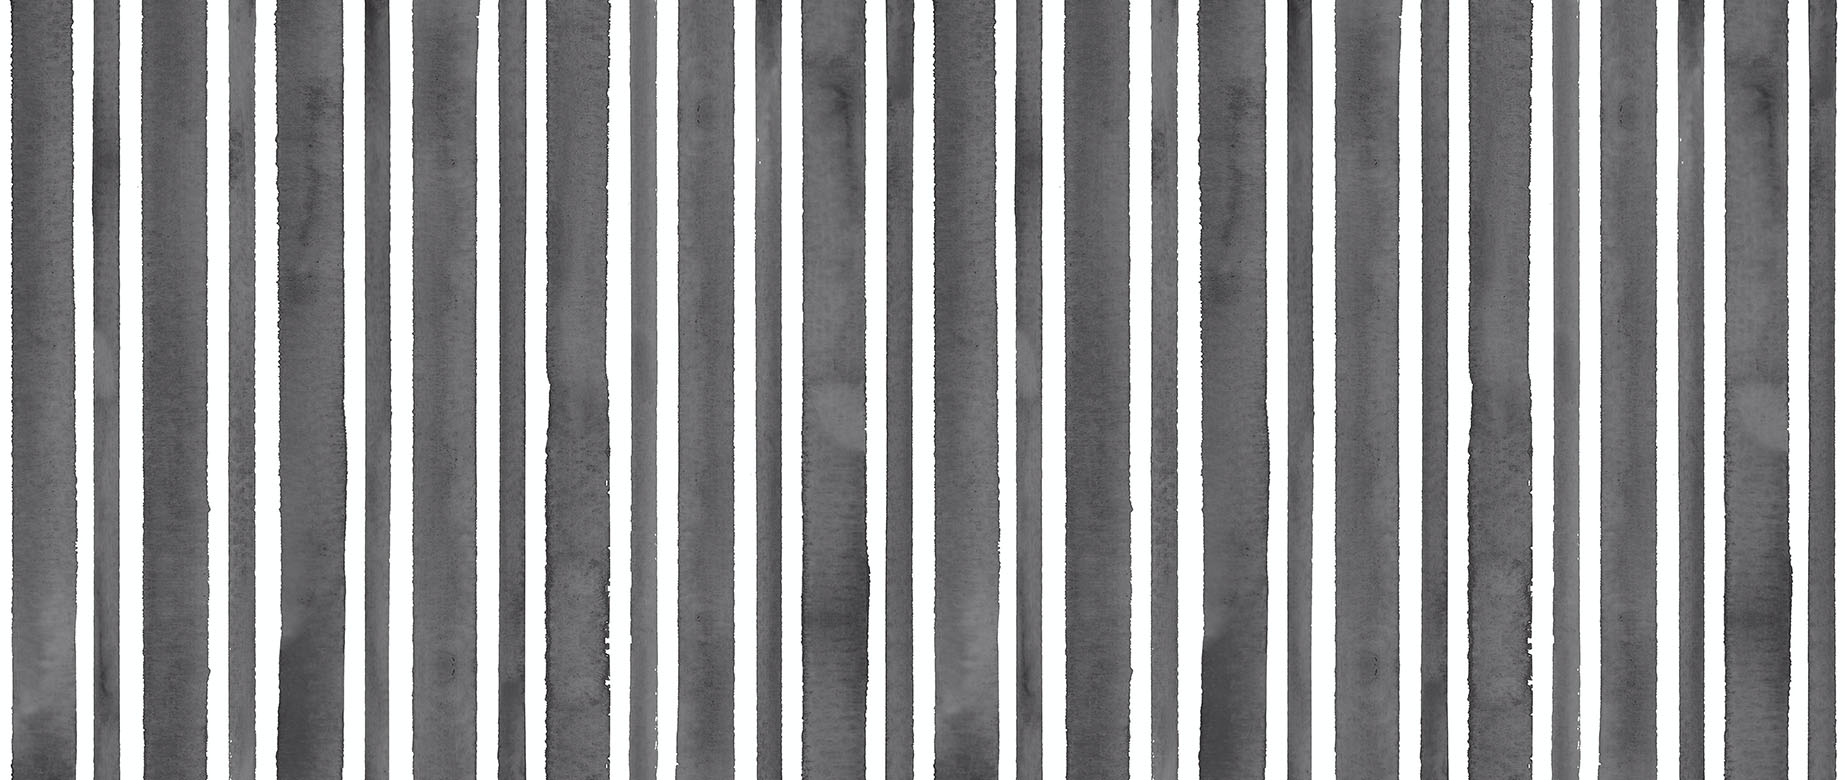 black-and-white-stripes-wallpaper-seamless-repeat-view